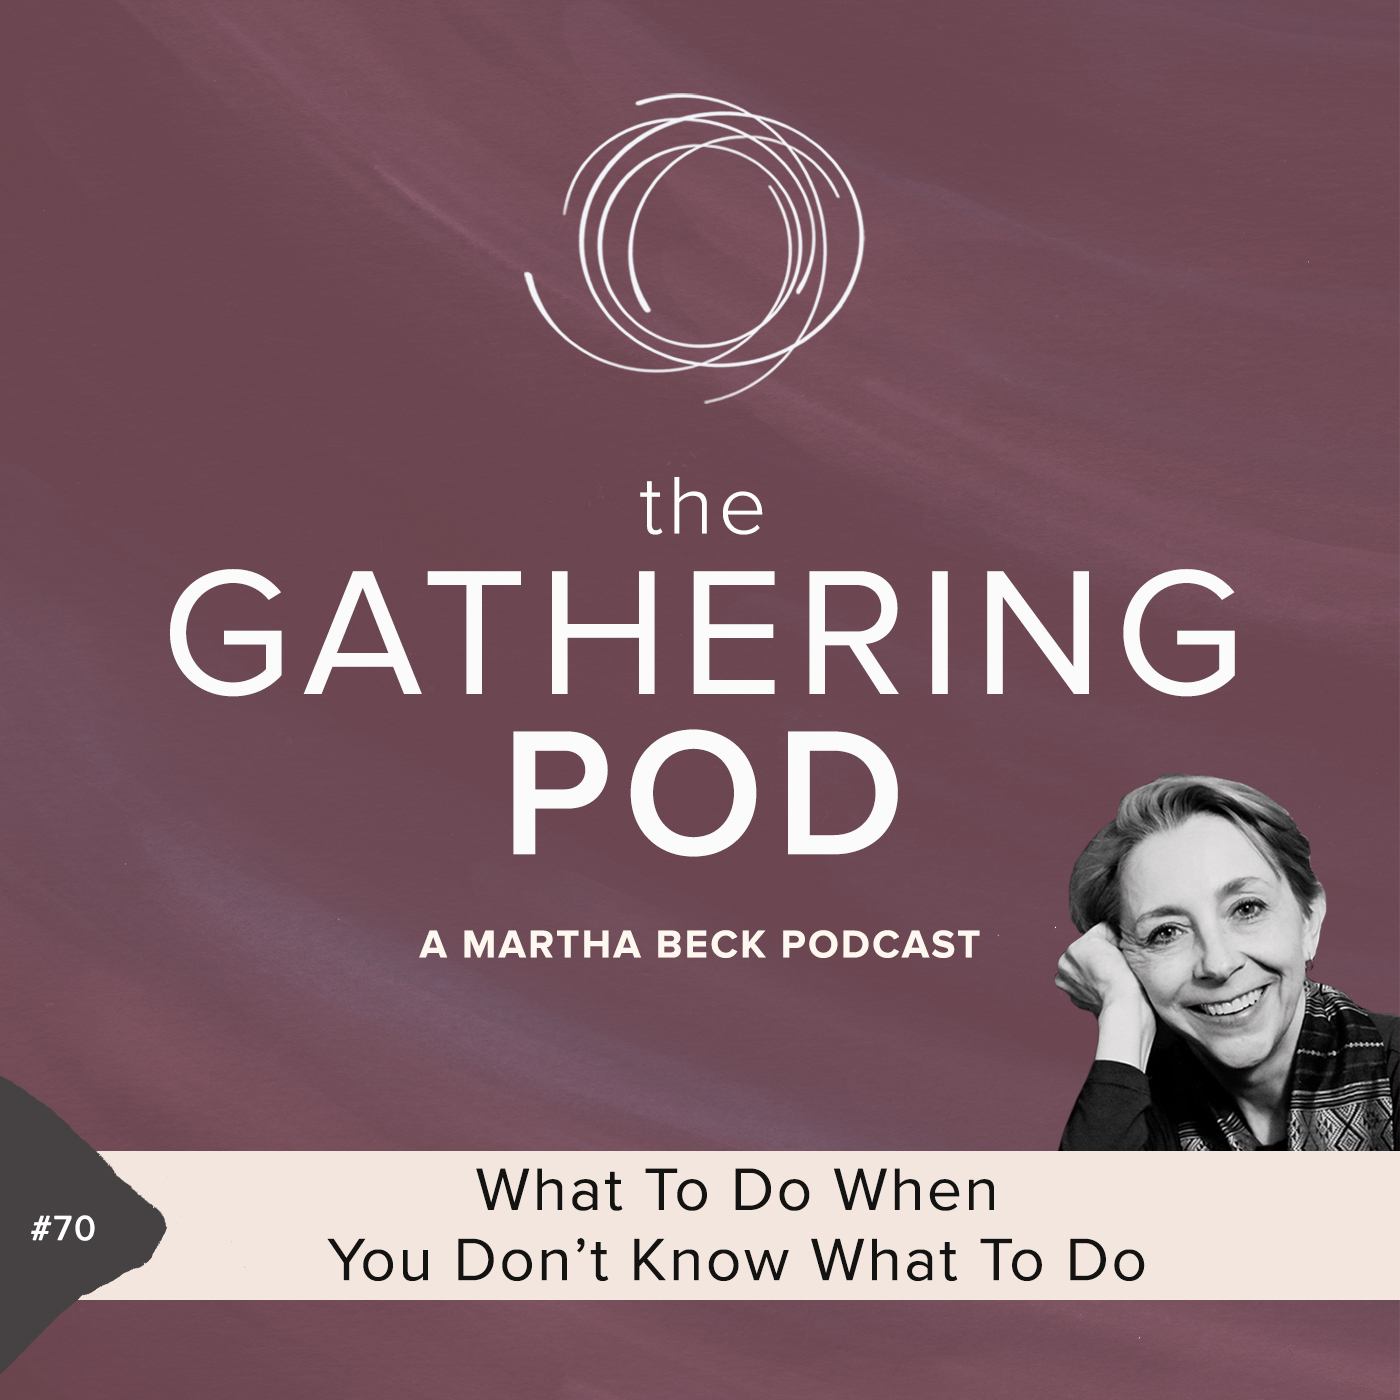 Image for The Gathering Pod A Martha Beck Podcast Episode #70 What To Do When You Don’t Know What To Do